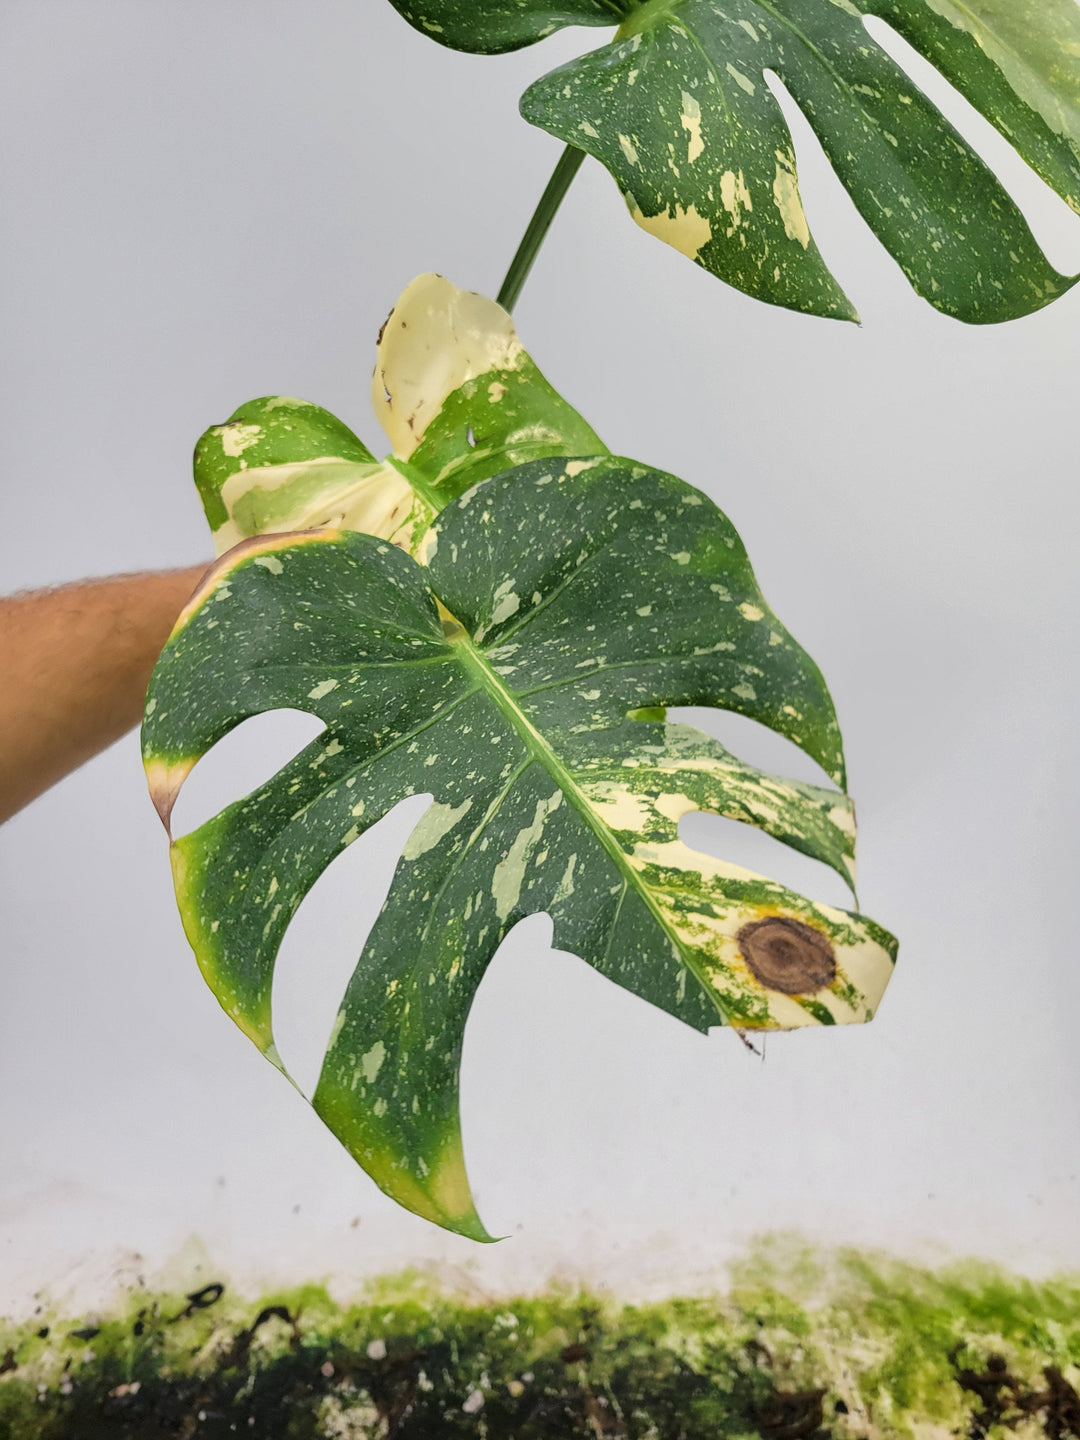 Monstera Thai Constellation, Nice XL size,  Highly variegated, Japanese Cultivar, exact plant pictured  US Seller #T3